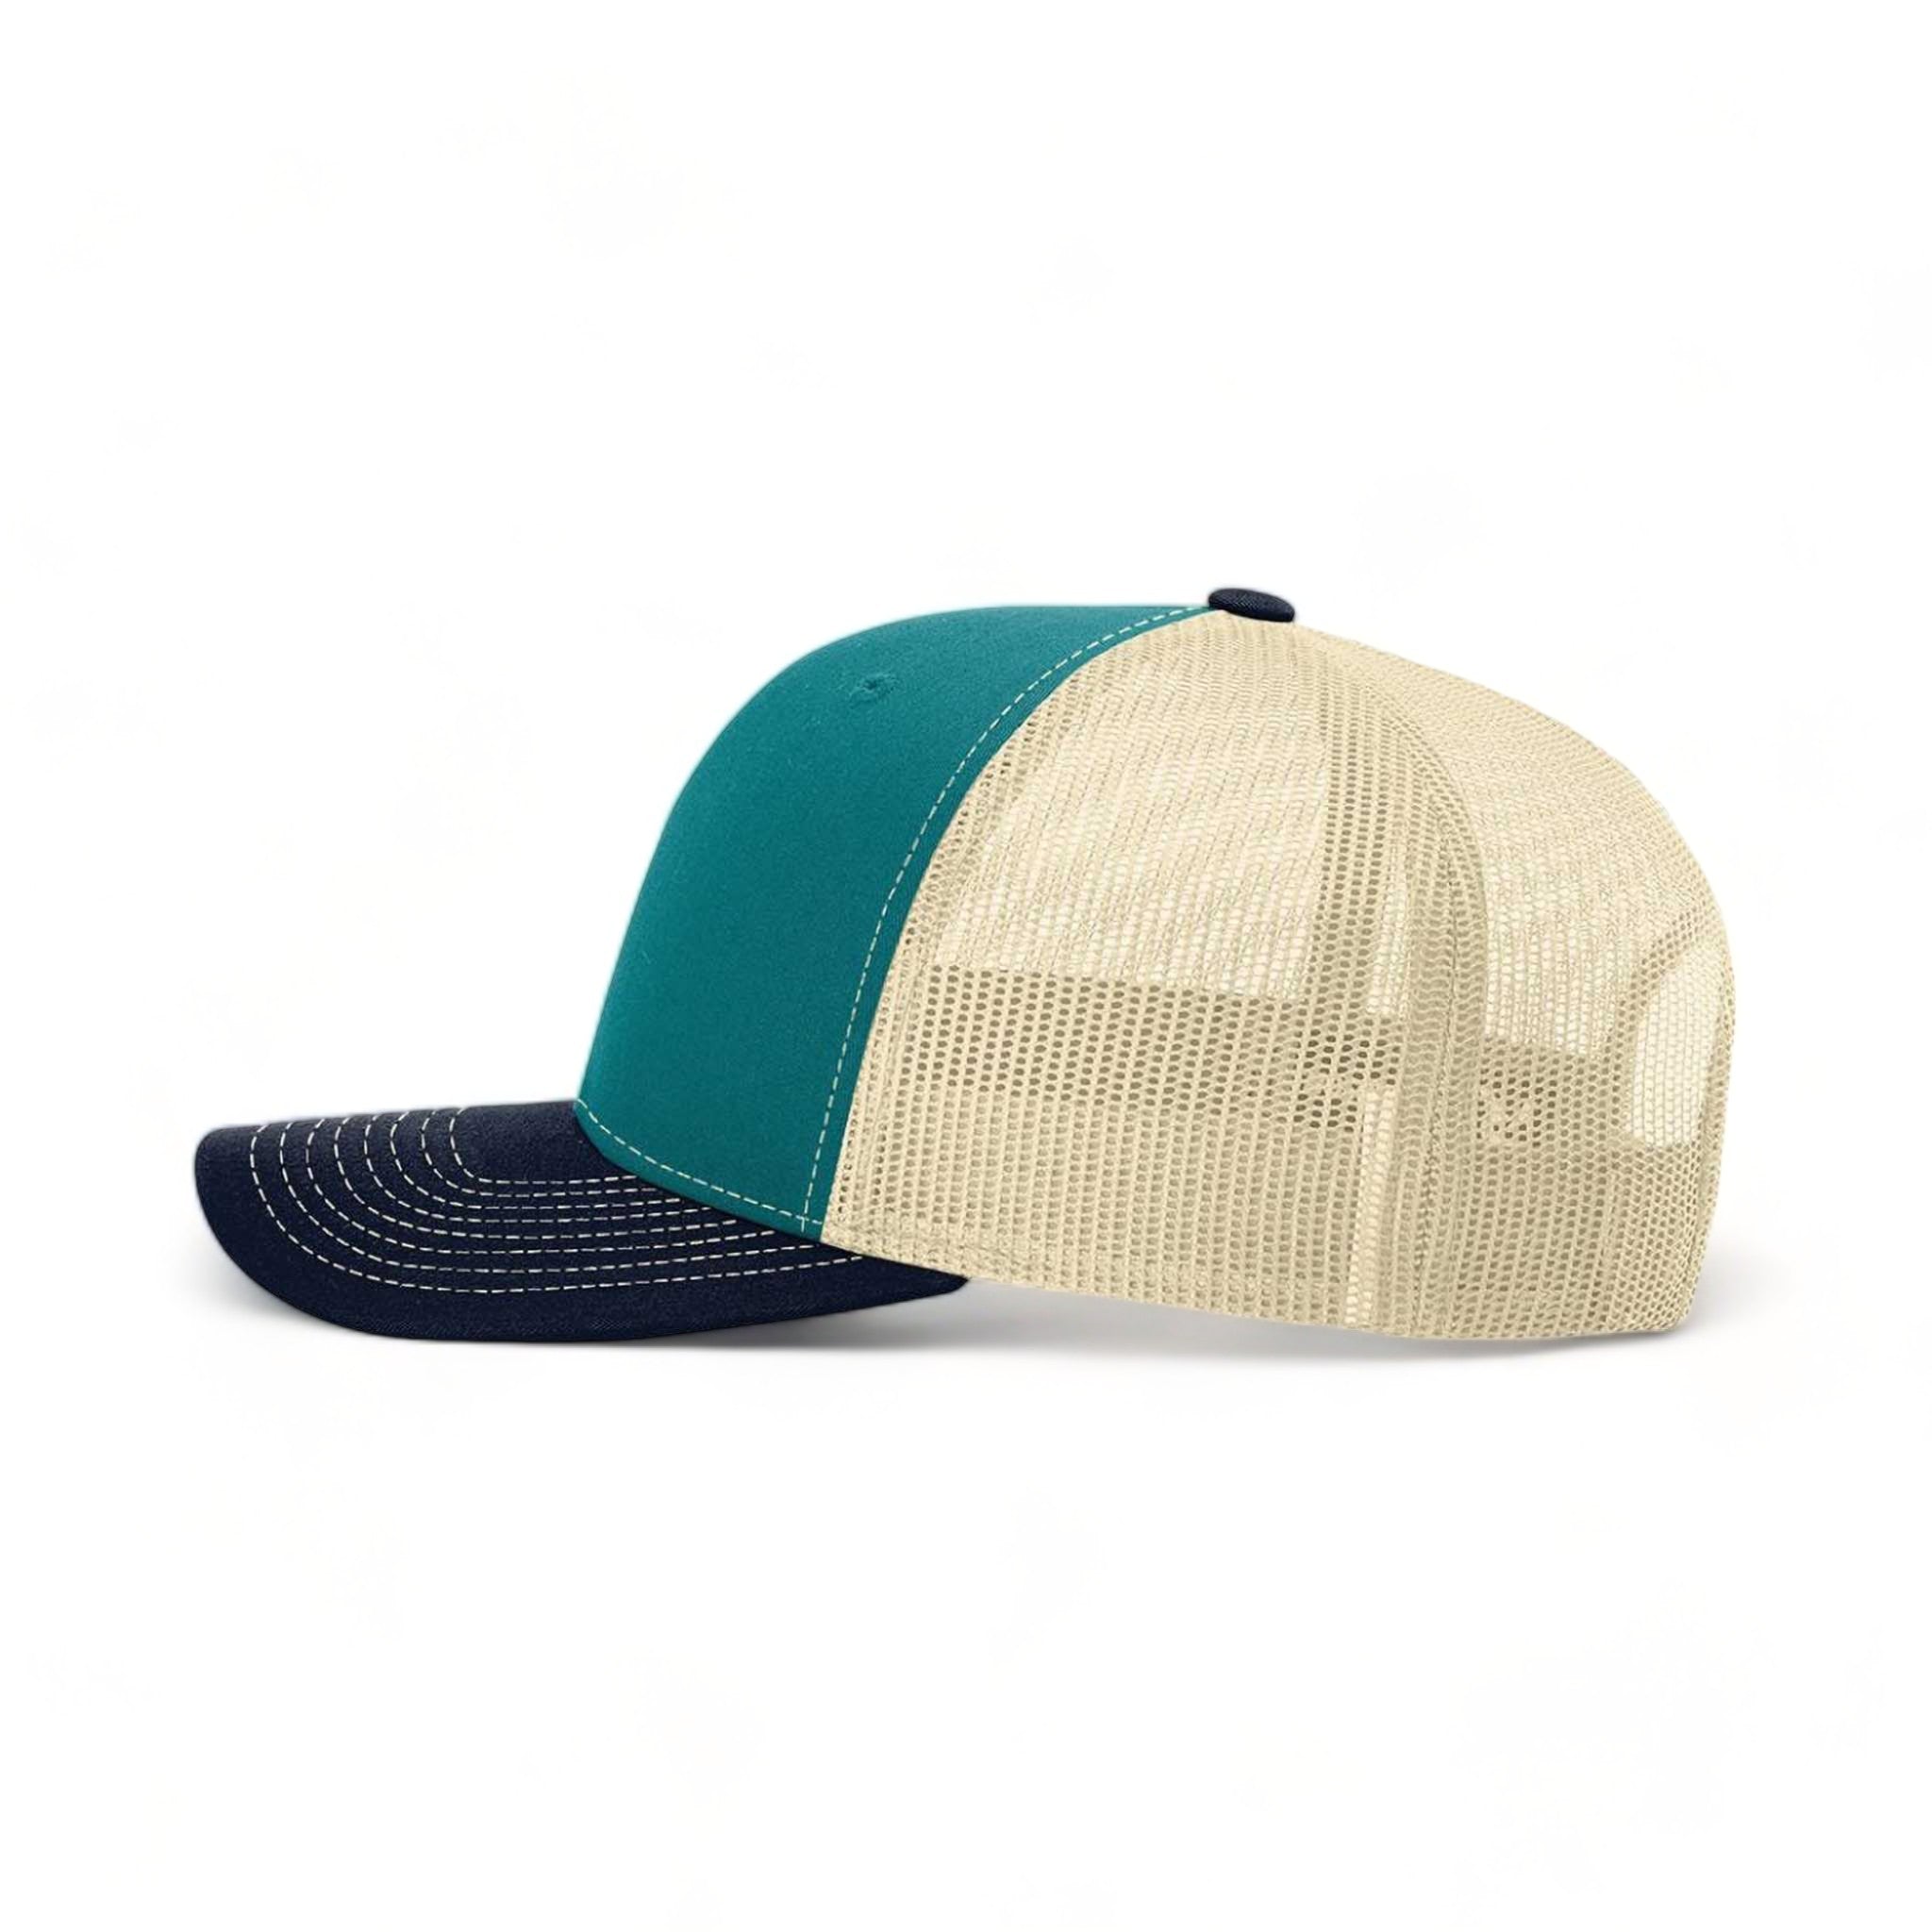 Side view of Richardson 112 custom hat in blue teal, birch and navy